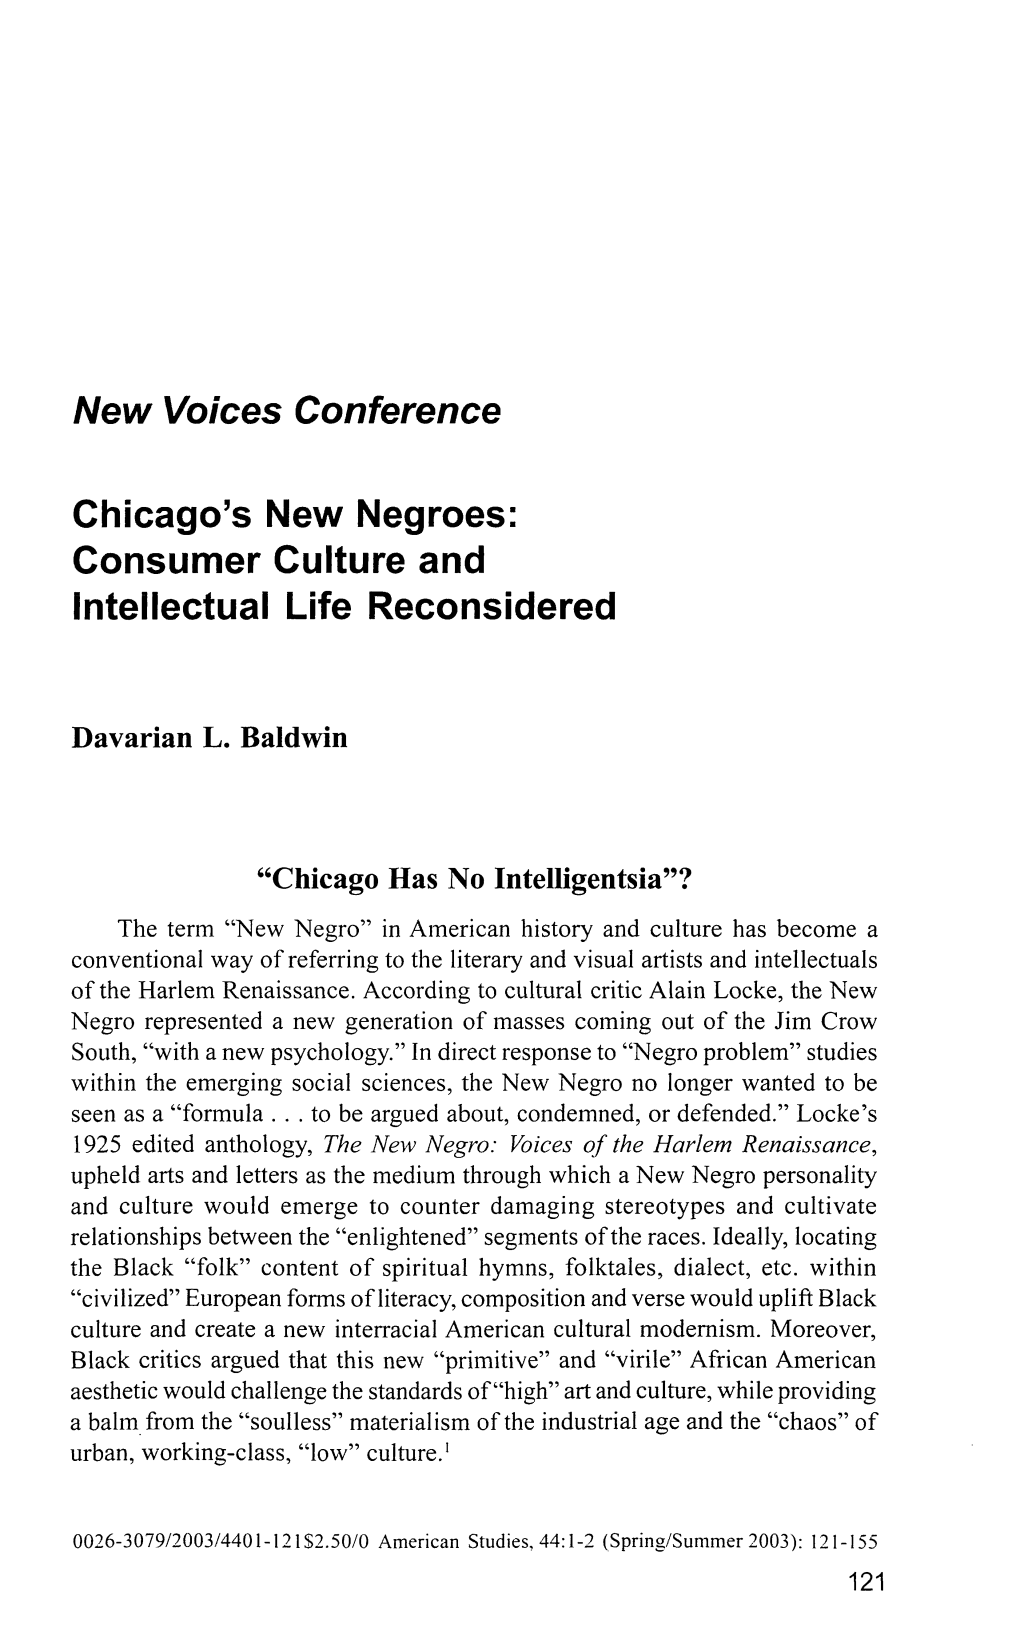 Chicago's New Negroes: Consumer Culture and Intellectual Life Reconsidered